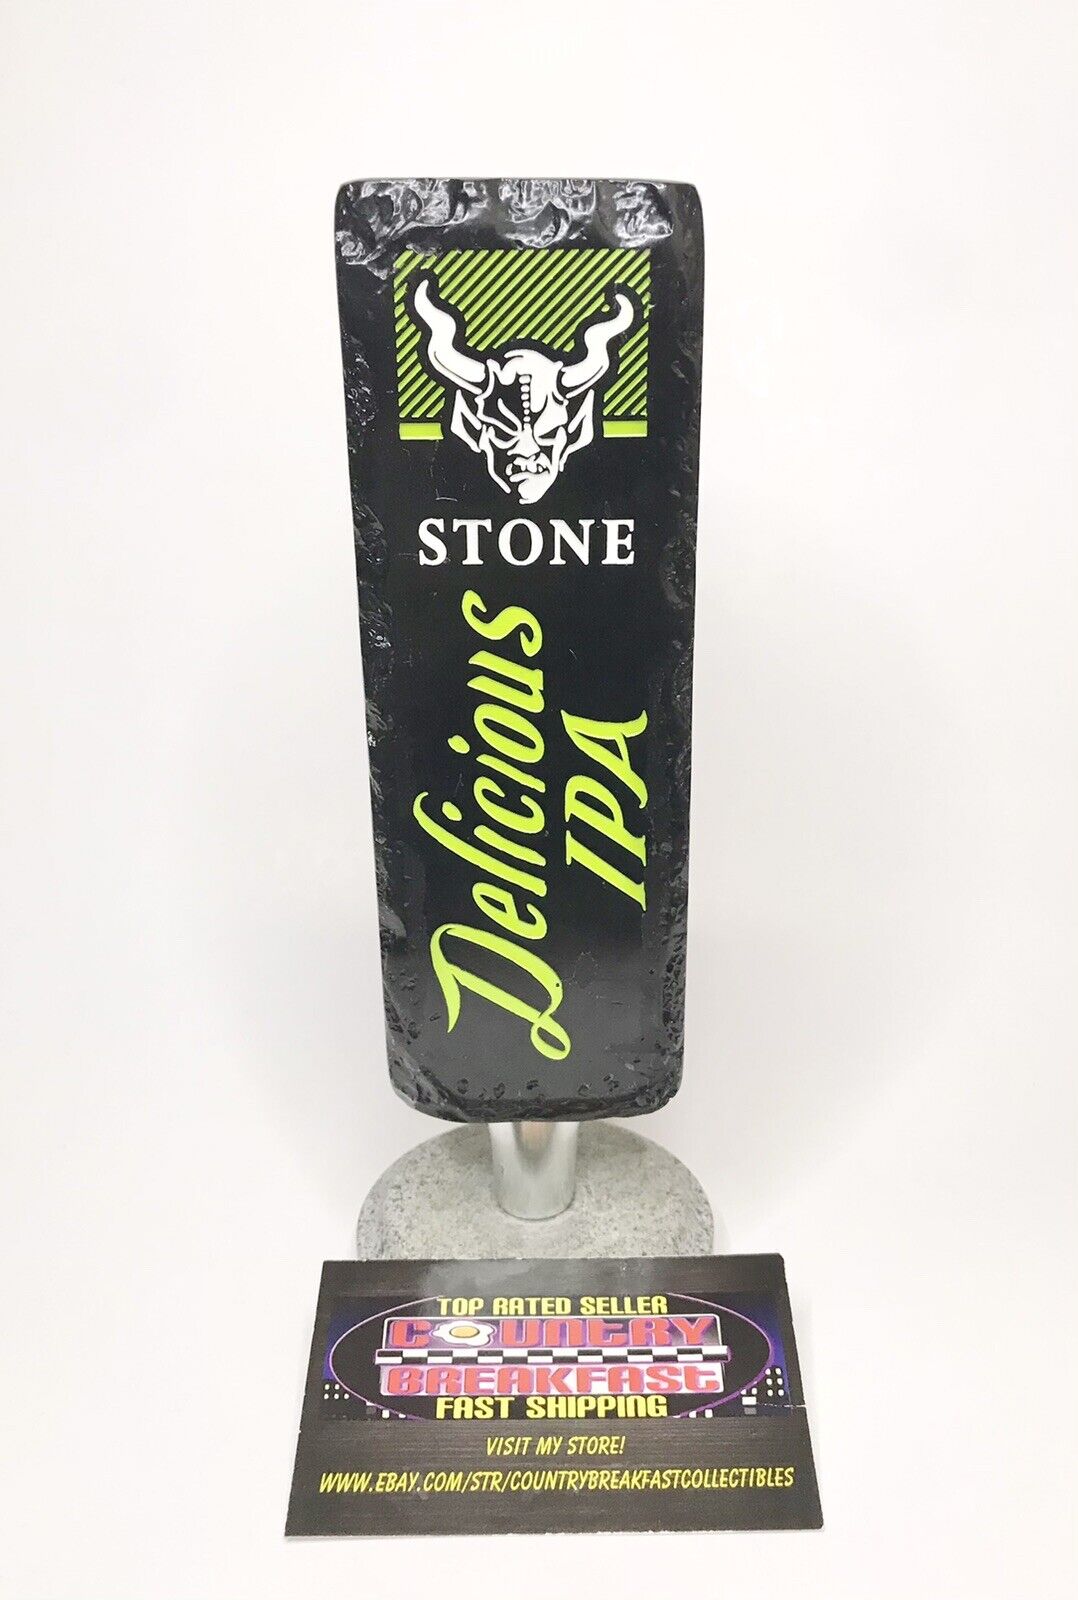 Stone Brewing Company Delicious IPA Beer Tap Handle 8” Tall - Nice